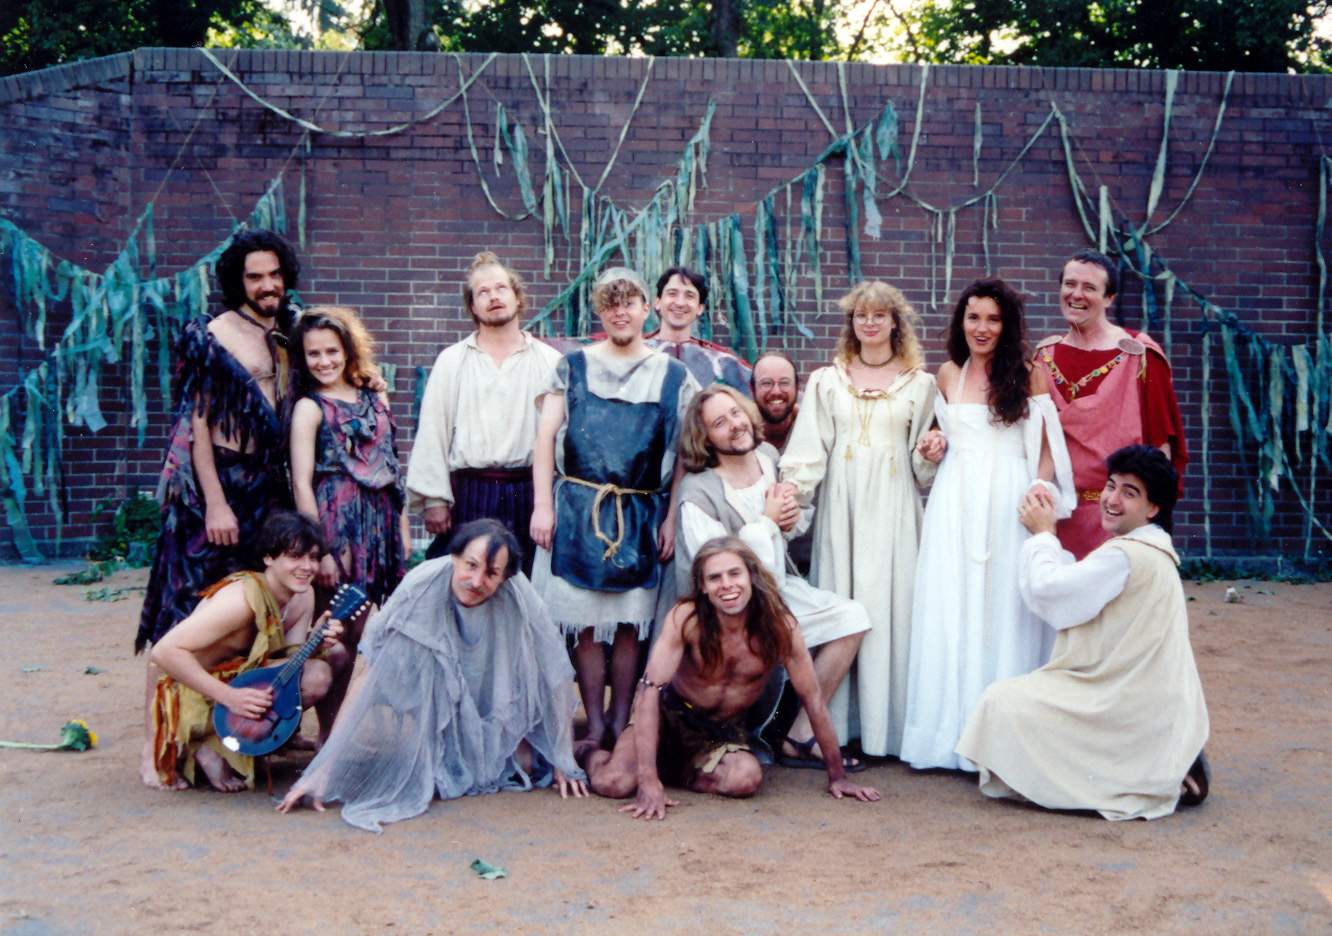 The cast of Midsummer Night's Dream at the old Volunteer Park Amphitheater